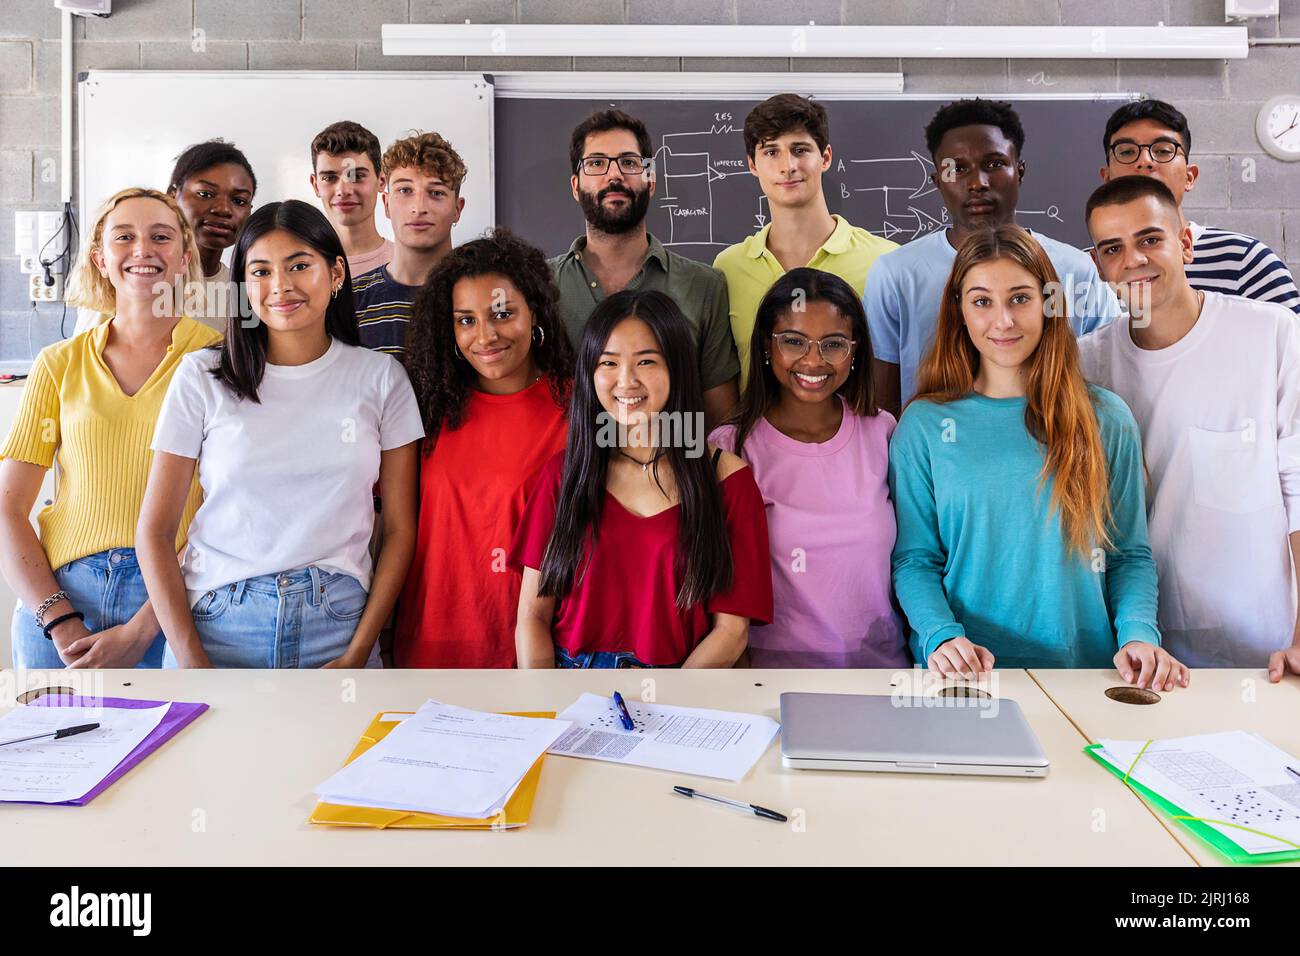 Portrait of smiling group of young multiracial students with teacher in class Stock Photo